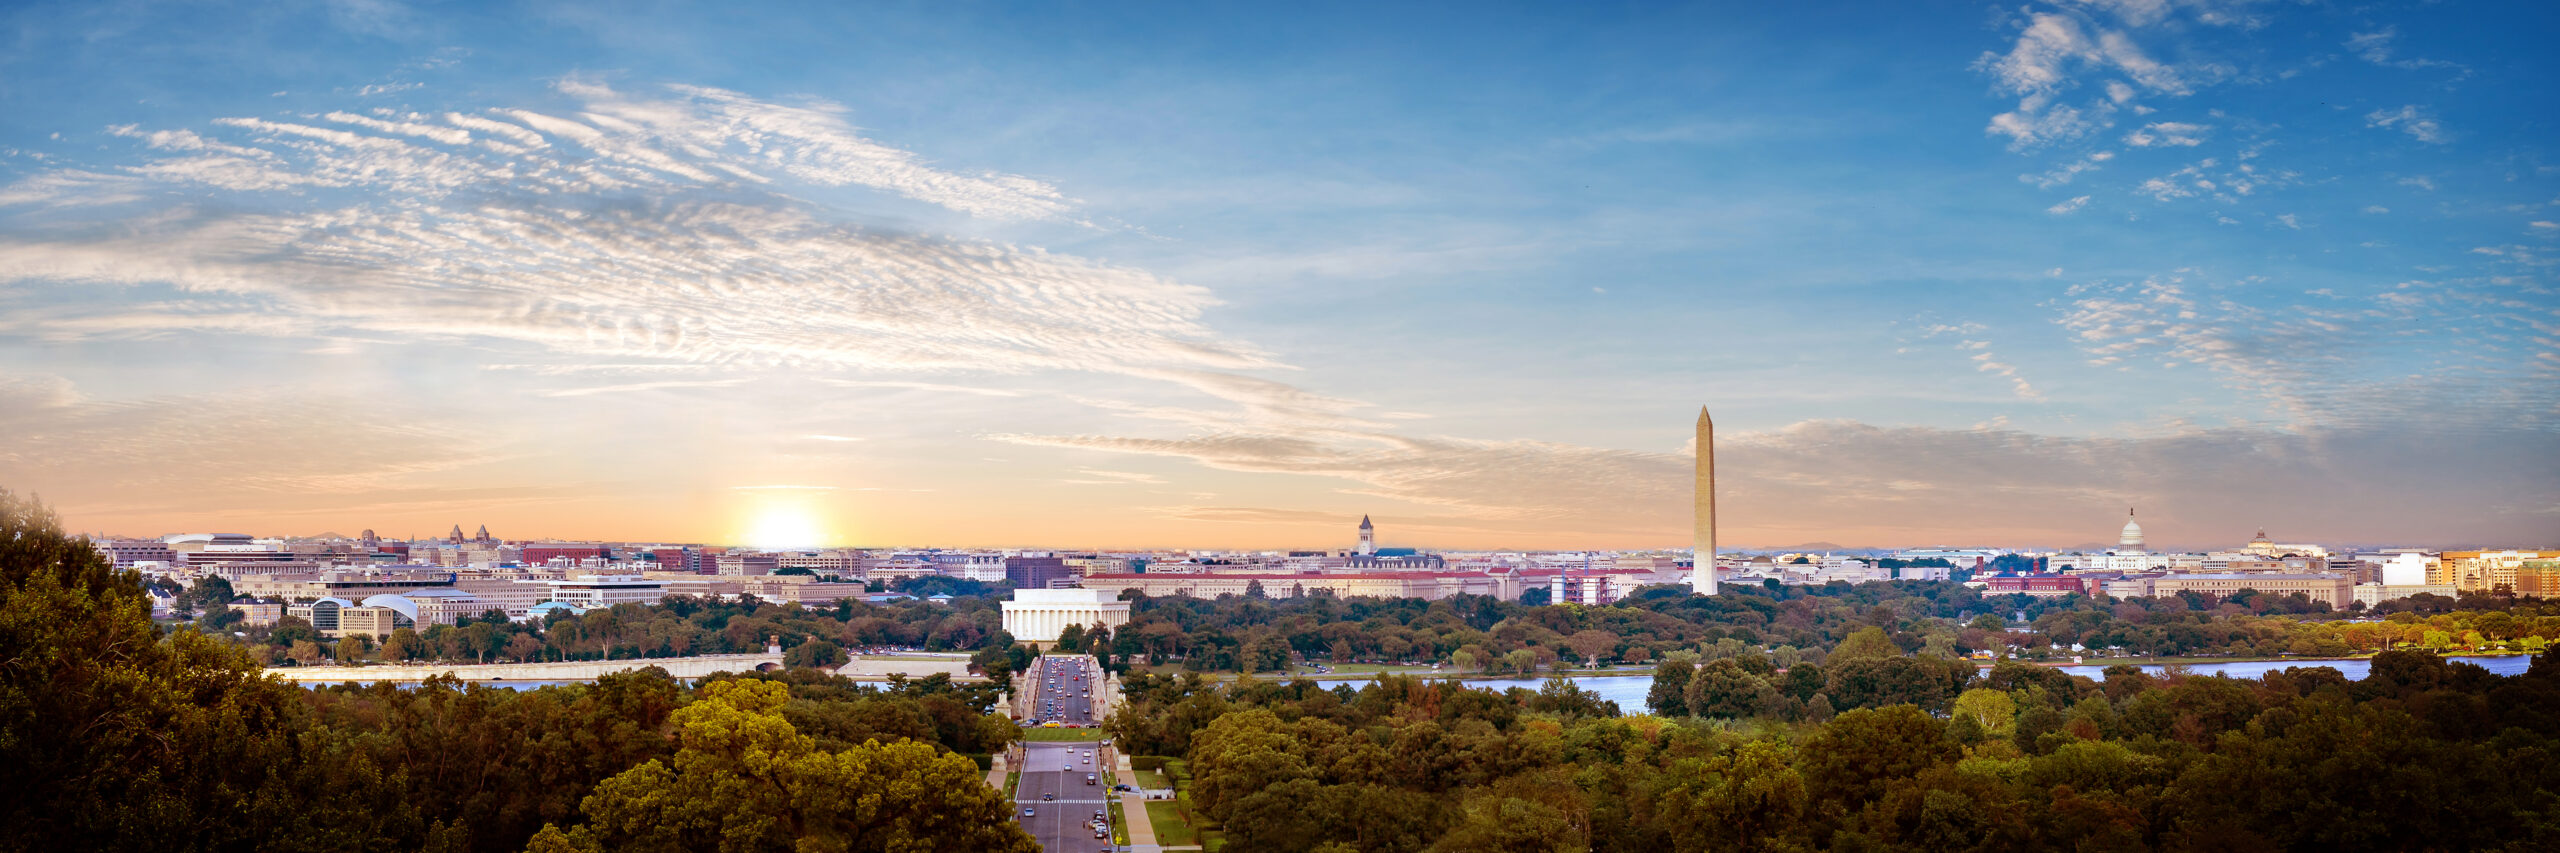 8 Things To Do In Washington, D.C. Before The End of Summer